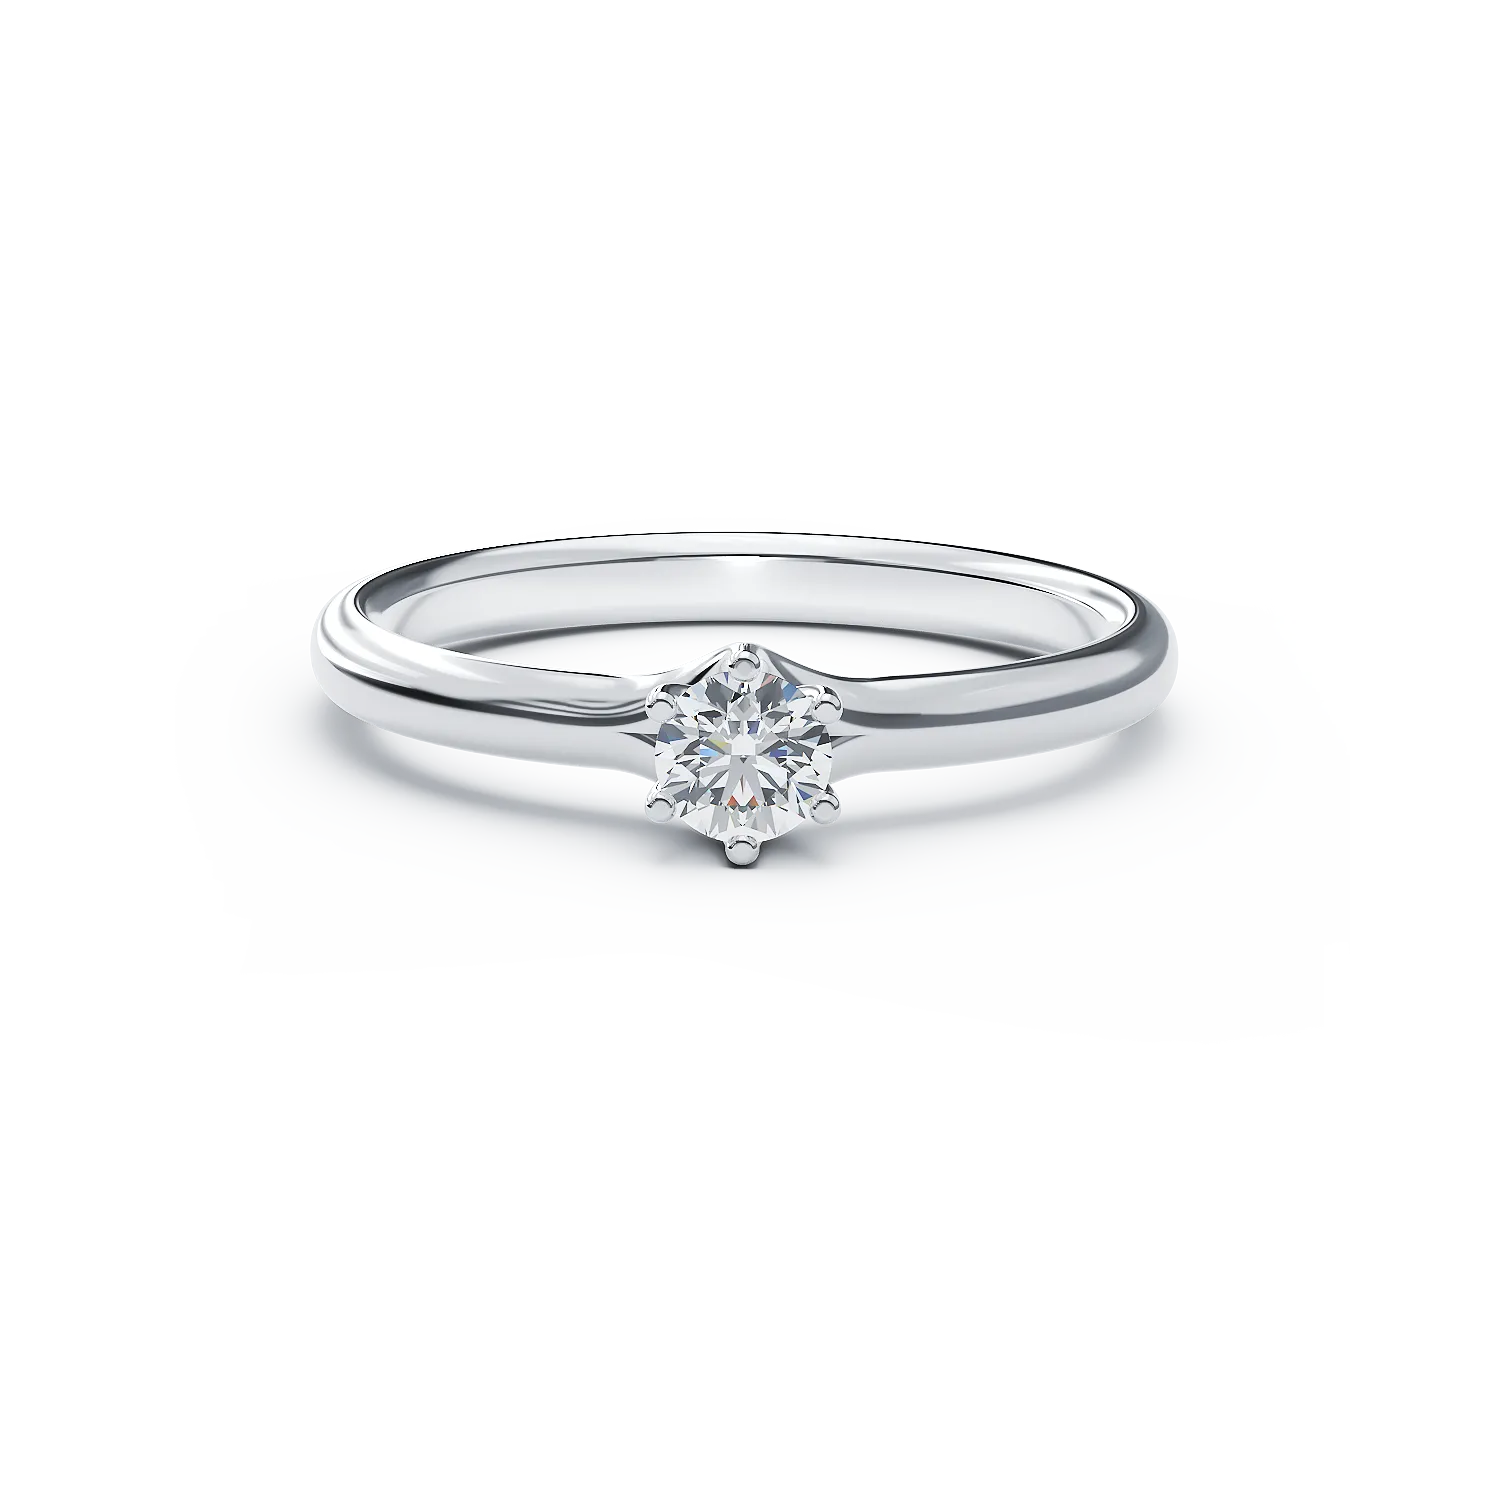 Platinum engagement ring with a 0.195ct solitaire diamond